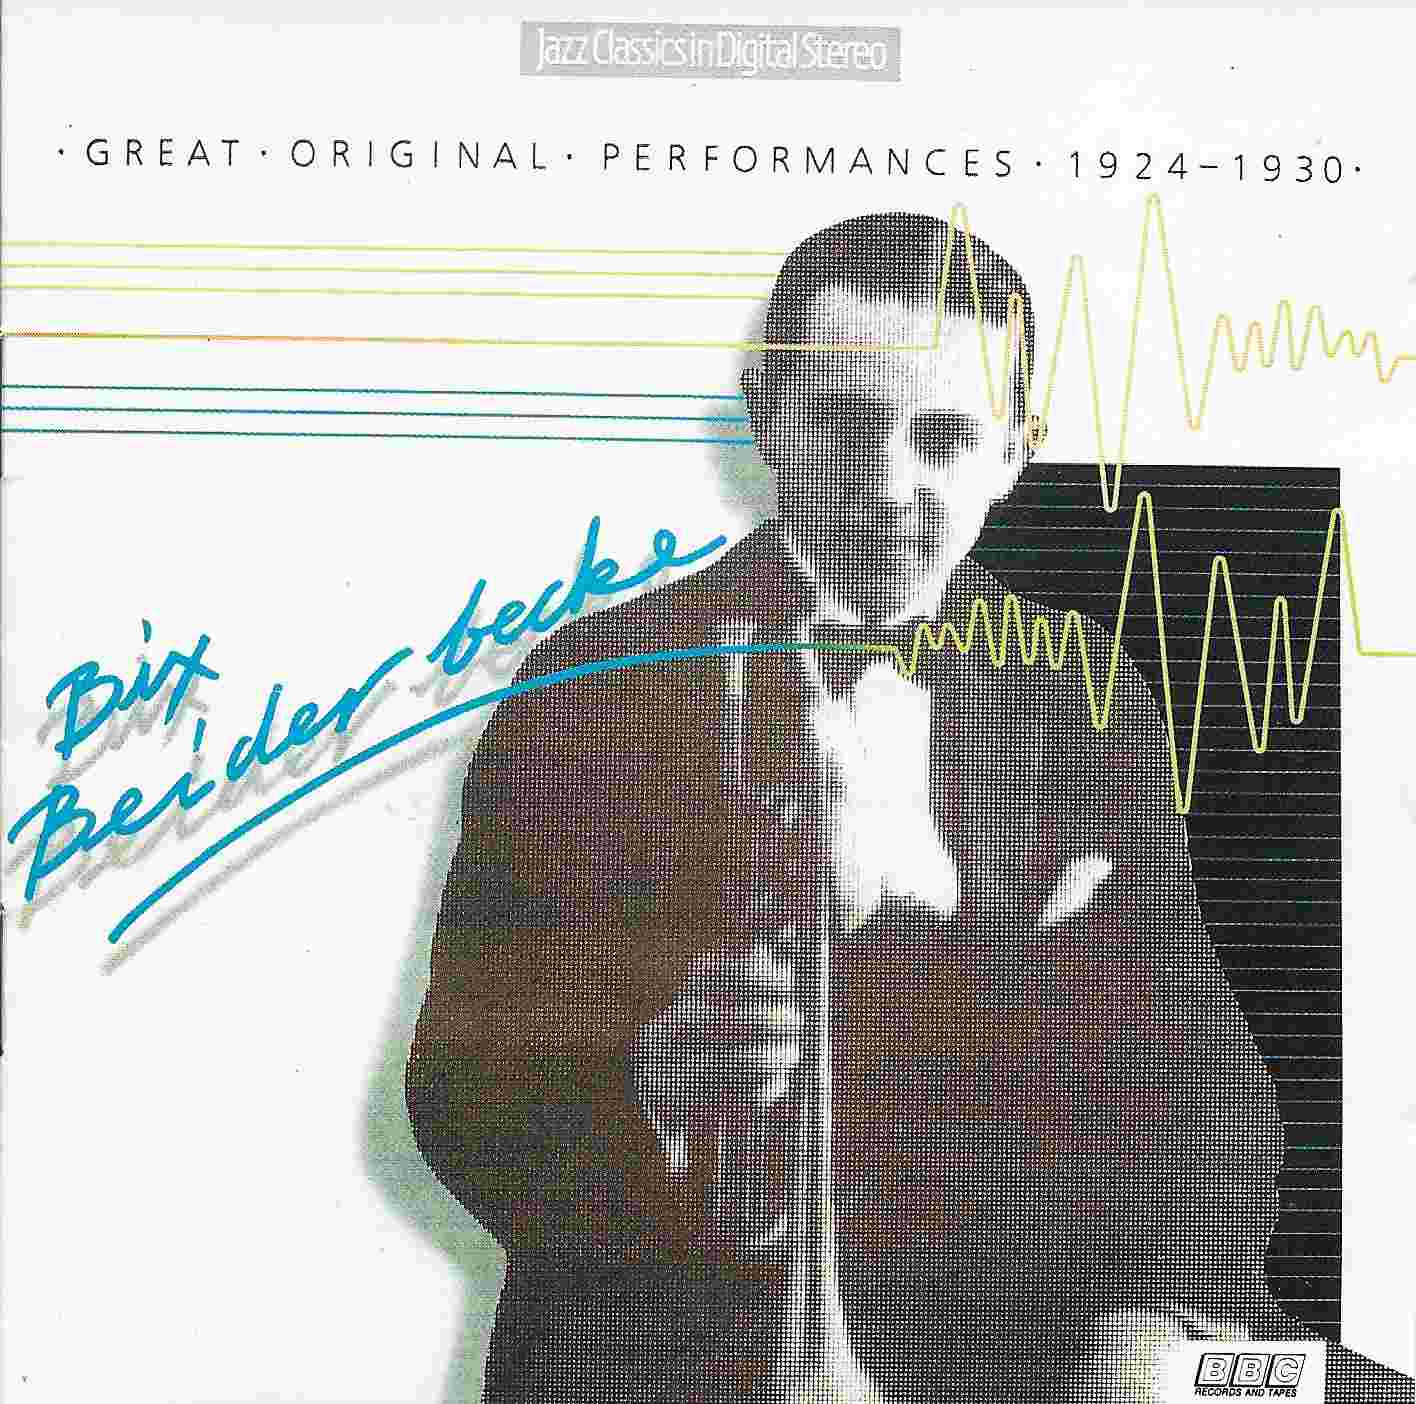 Picture of Jazz Classics - Bix Beiderbecke by artist Bix Beiderbecke from the BBC cds - Records and Tapes library